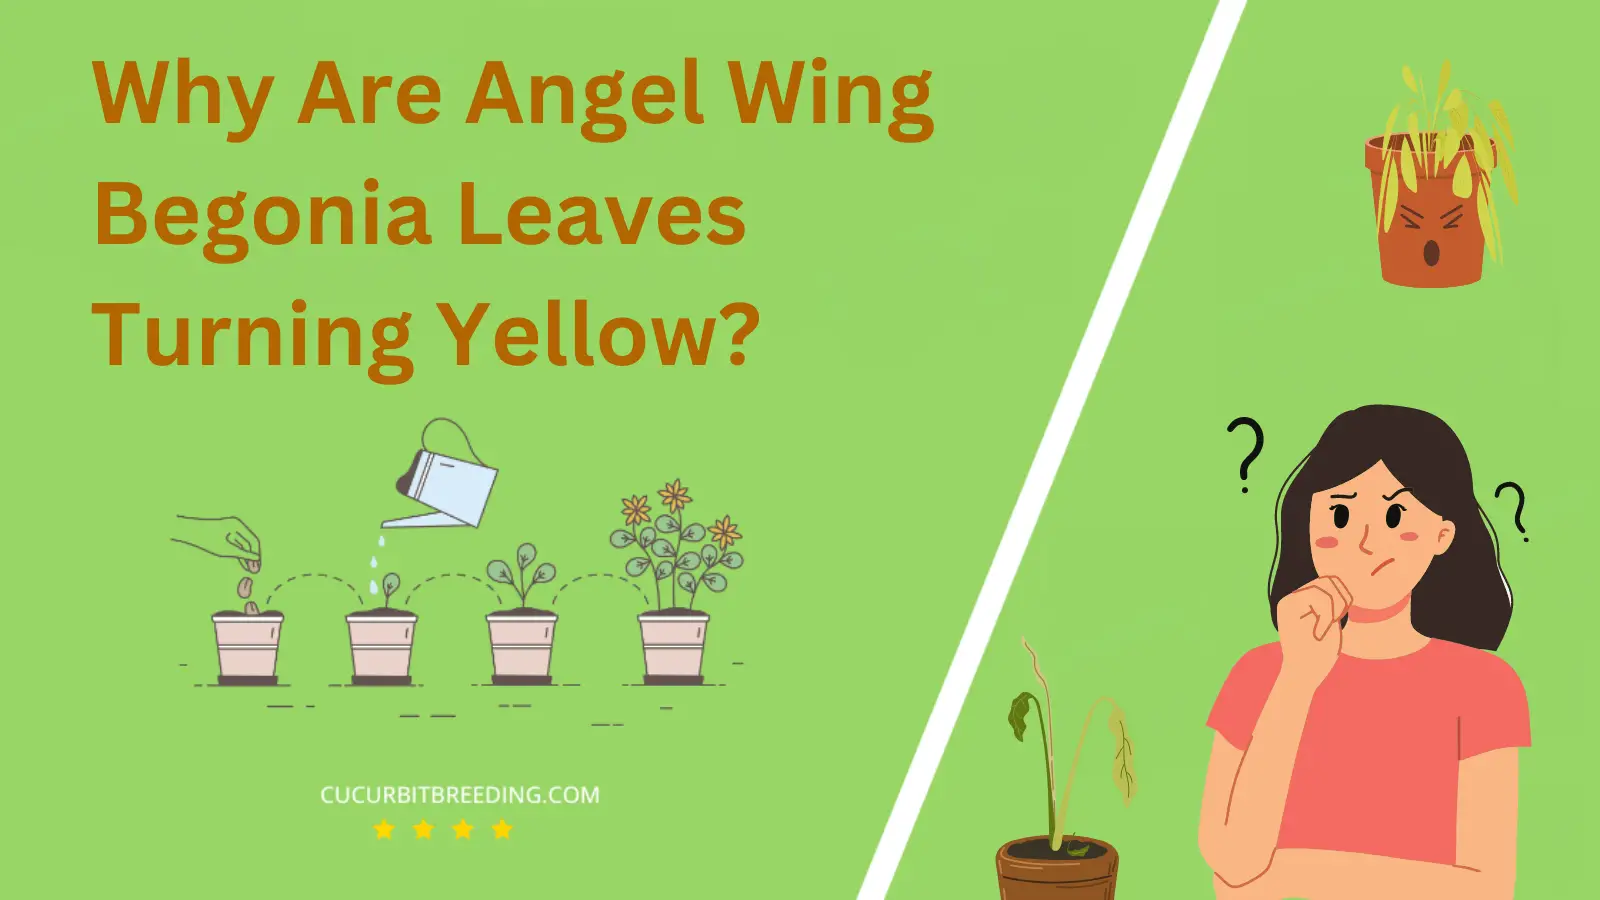 Why Are Angel Wing Begonia Leaves Turning Yellow